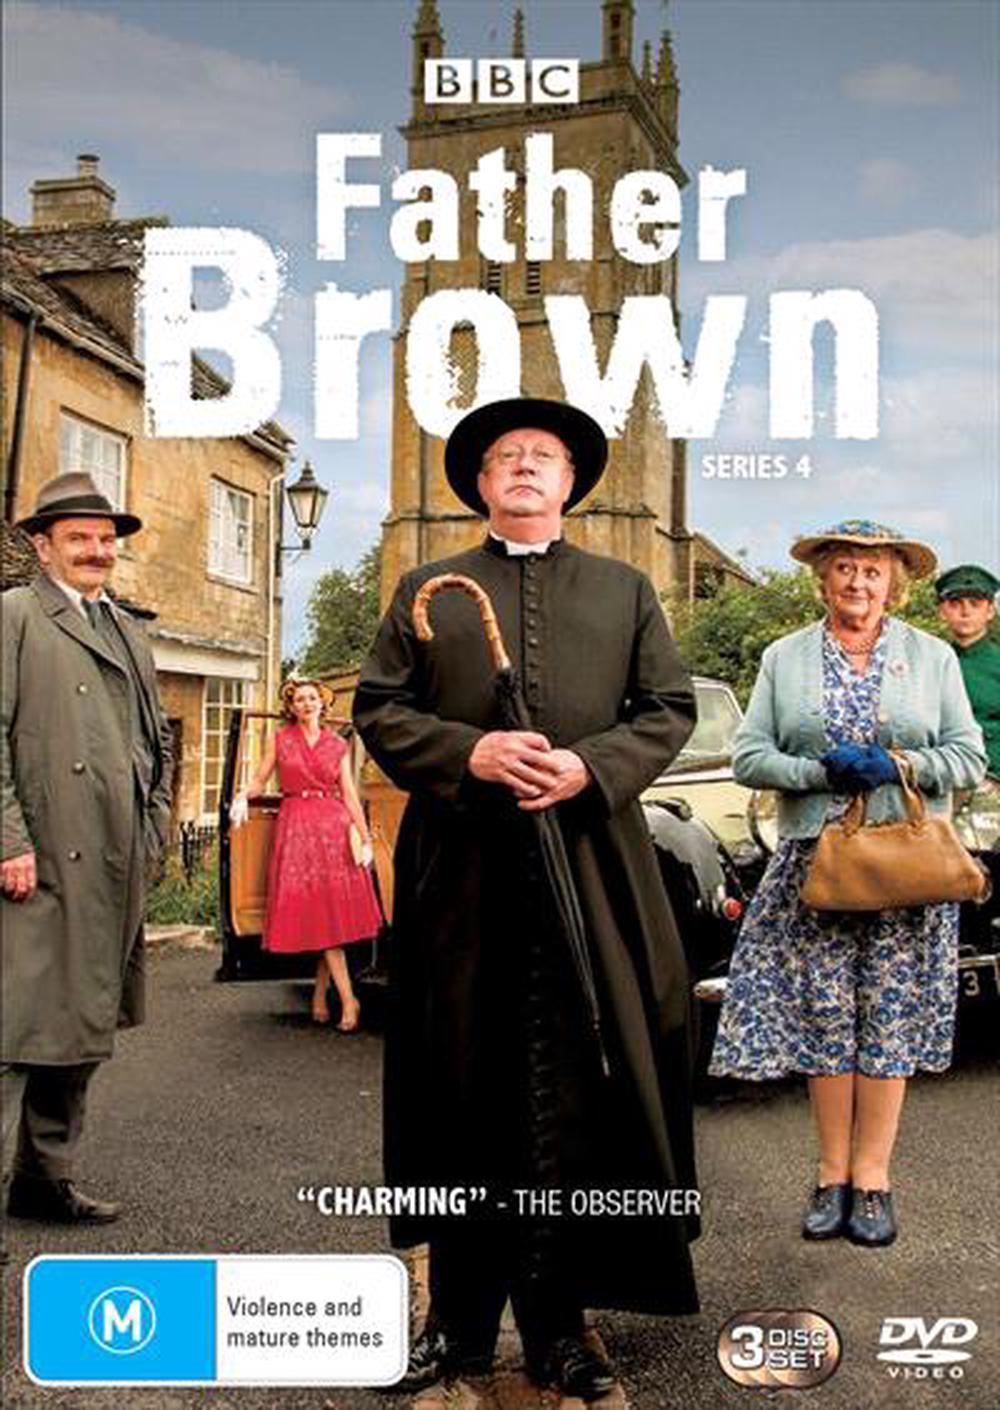 Father Brown: Series 4, DVD | Buy online at The Nile